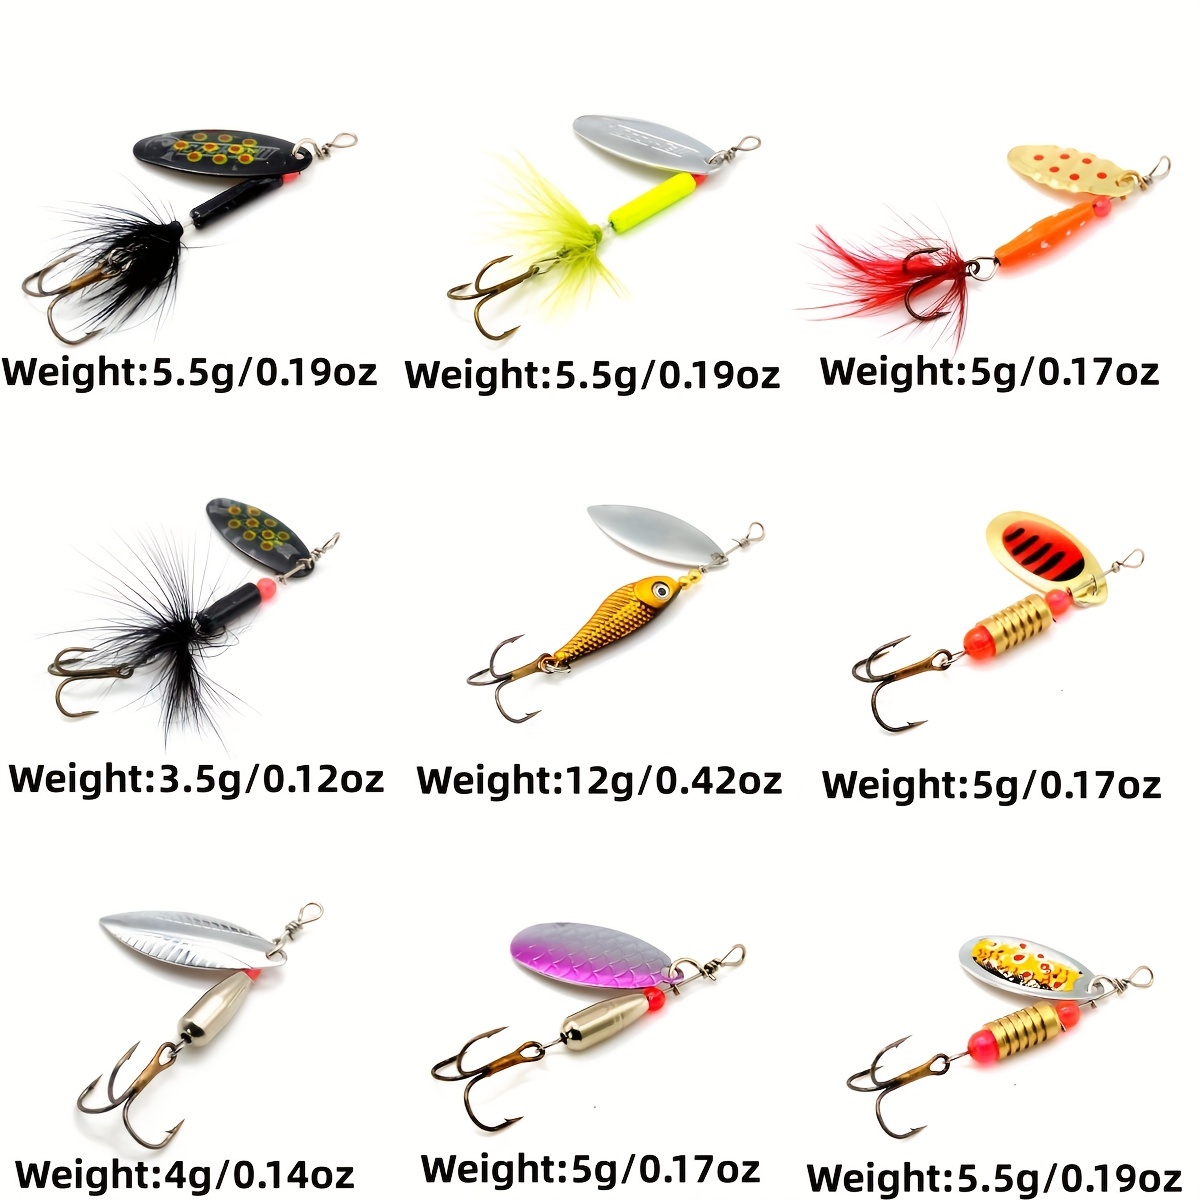  Skylety 40 Pieces Fishing Lures Hard Metal Spinner Lures  Spinner Baits for Bass Perch Pike Walleye Trout Salmon Bass Lures Trout  Lures with Tackle Box : Sports & Outdoors